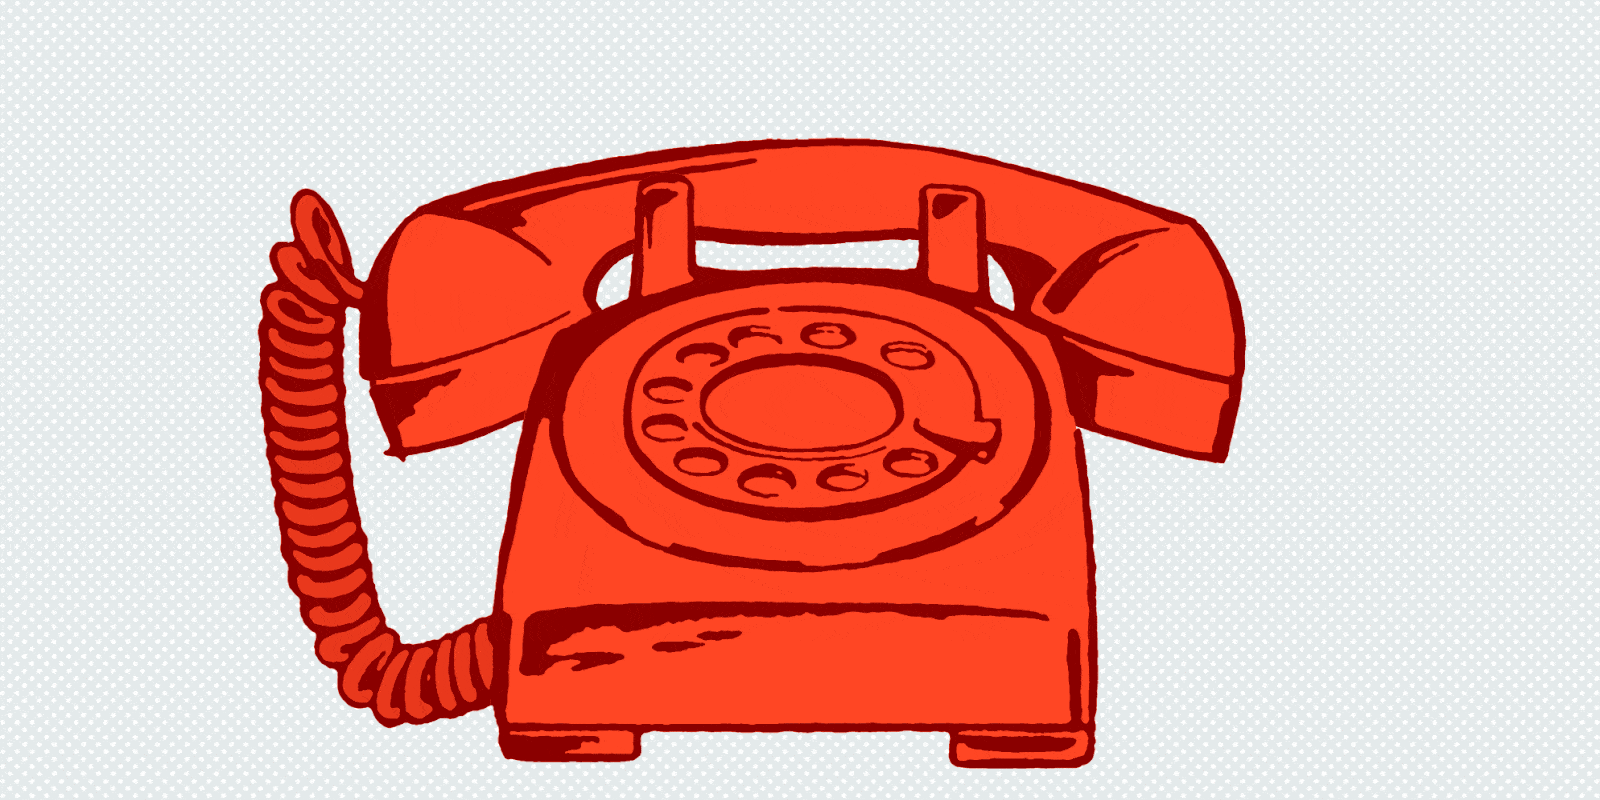 Ringing Phone Gif - ClipArt Best